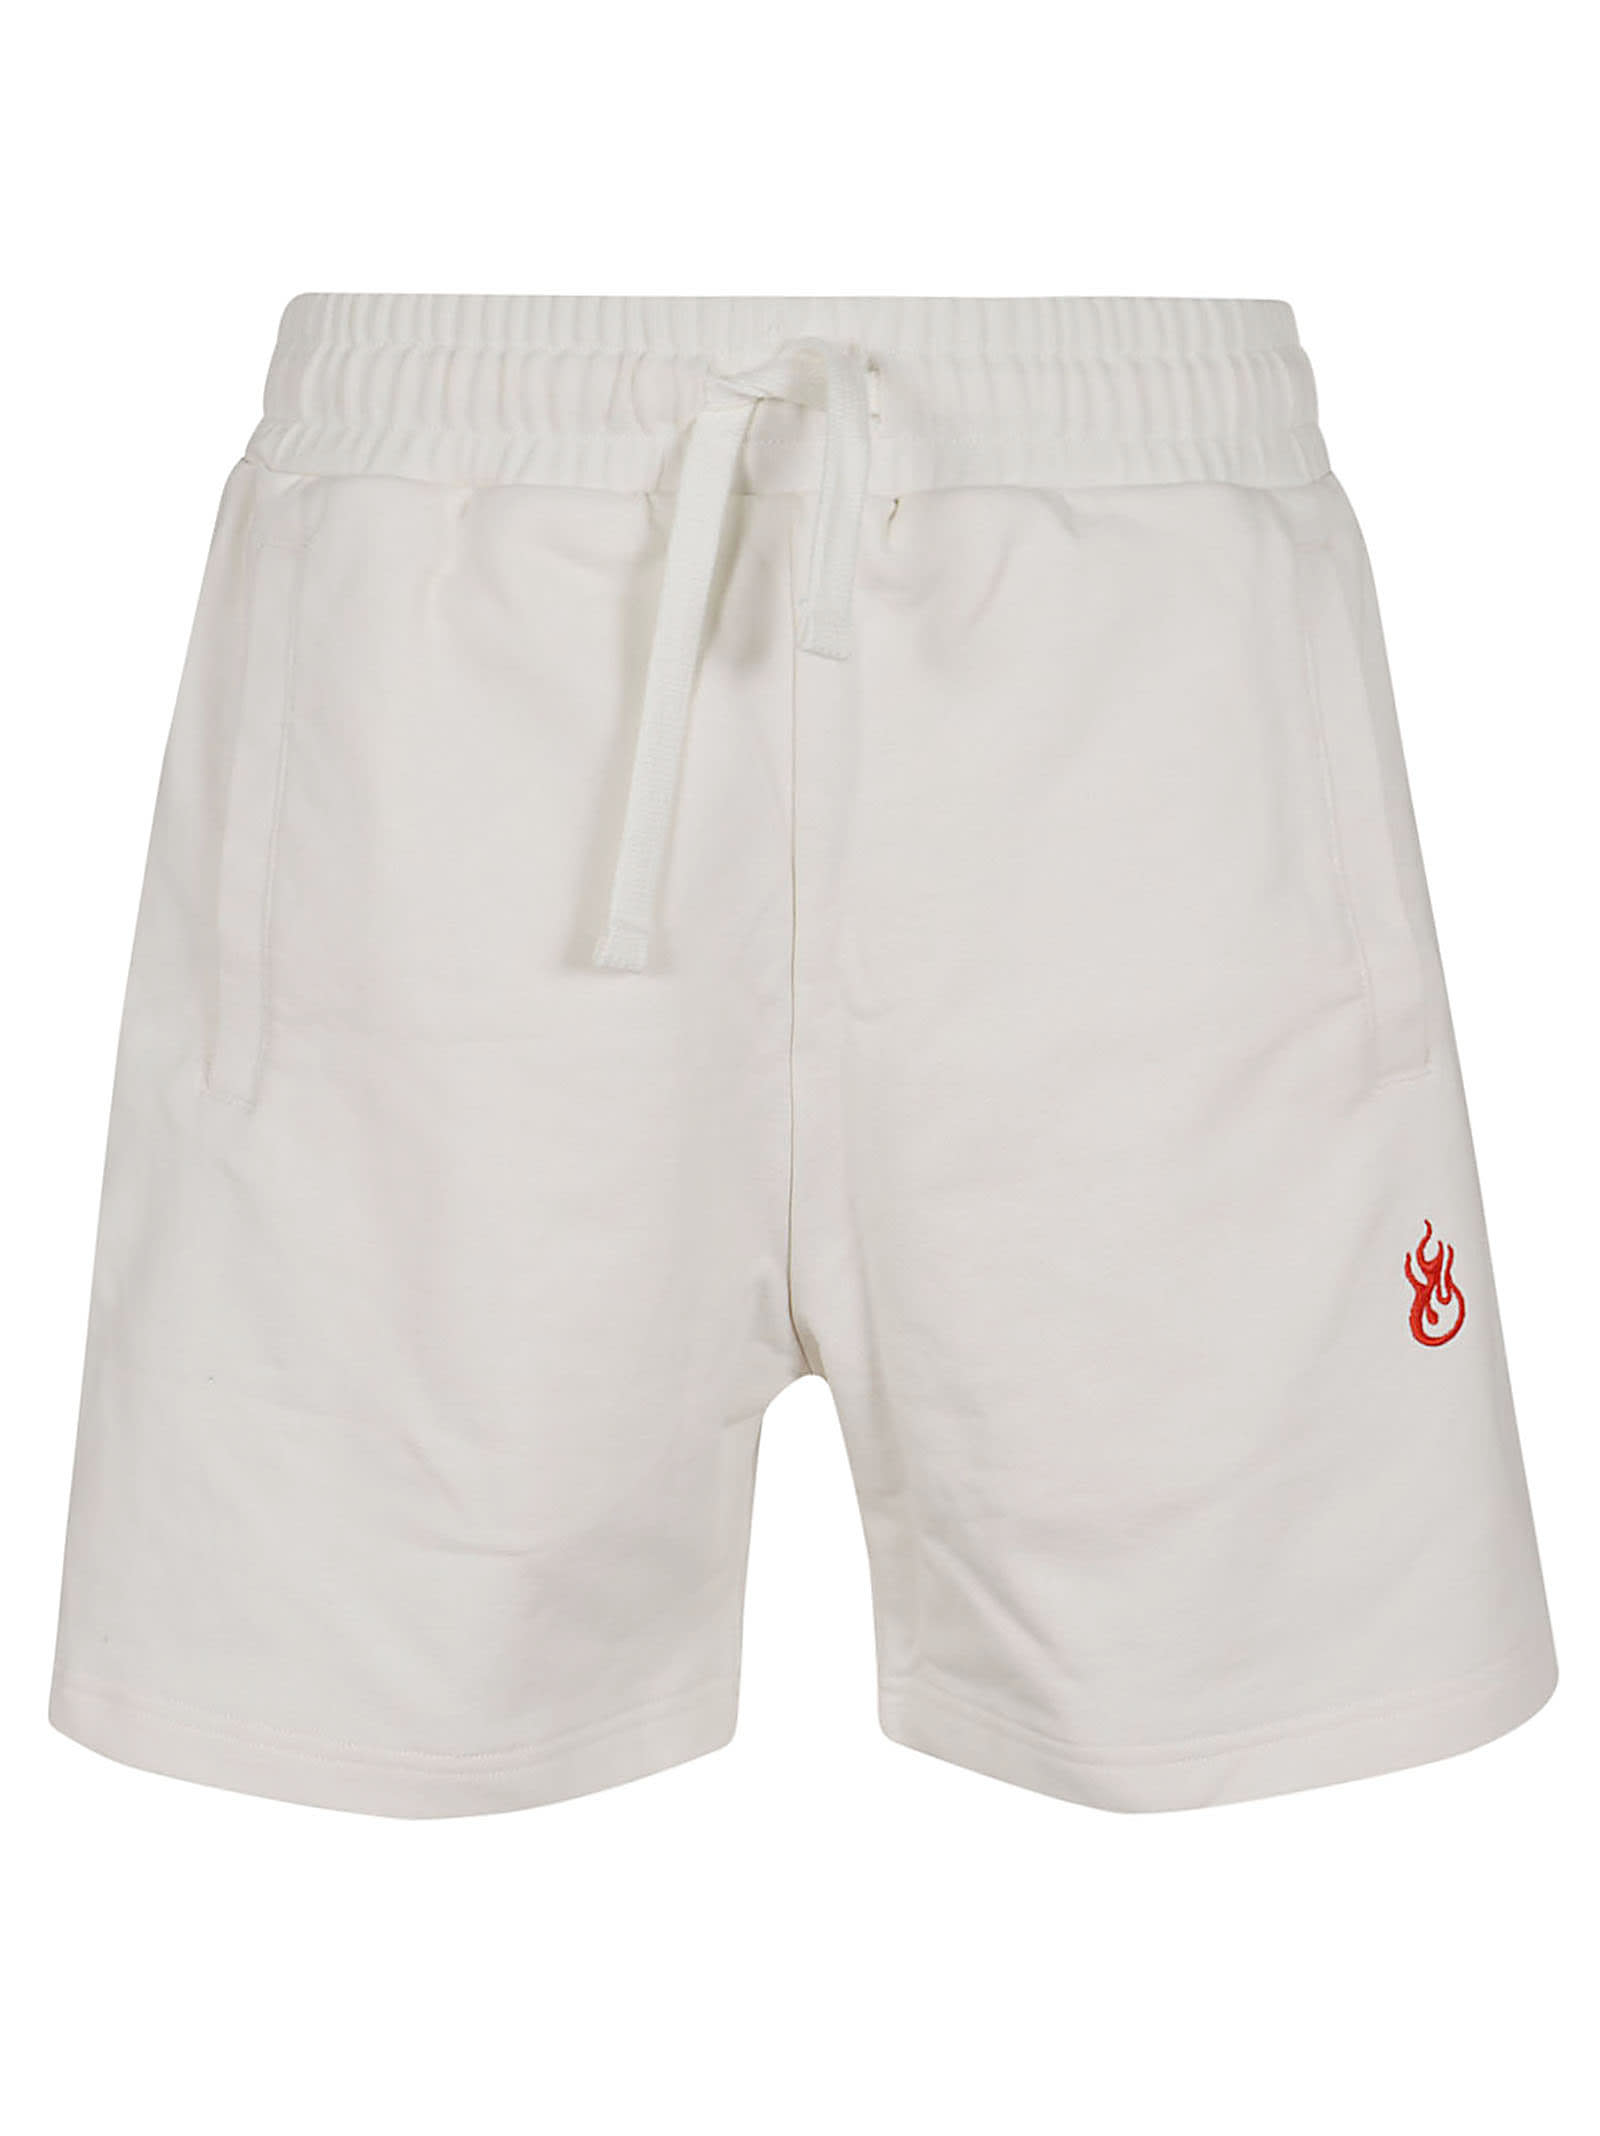 White Shorts With Flames Logo And Metal Label